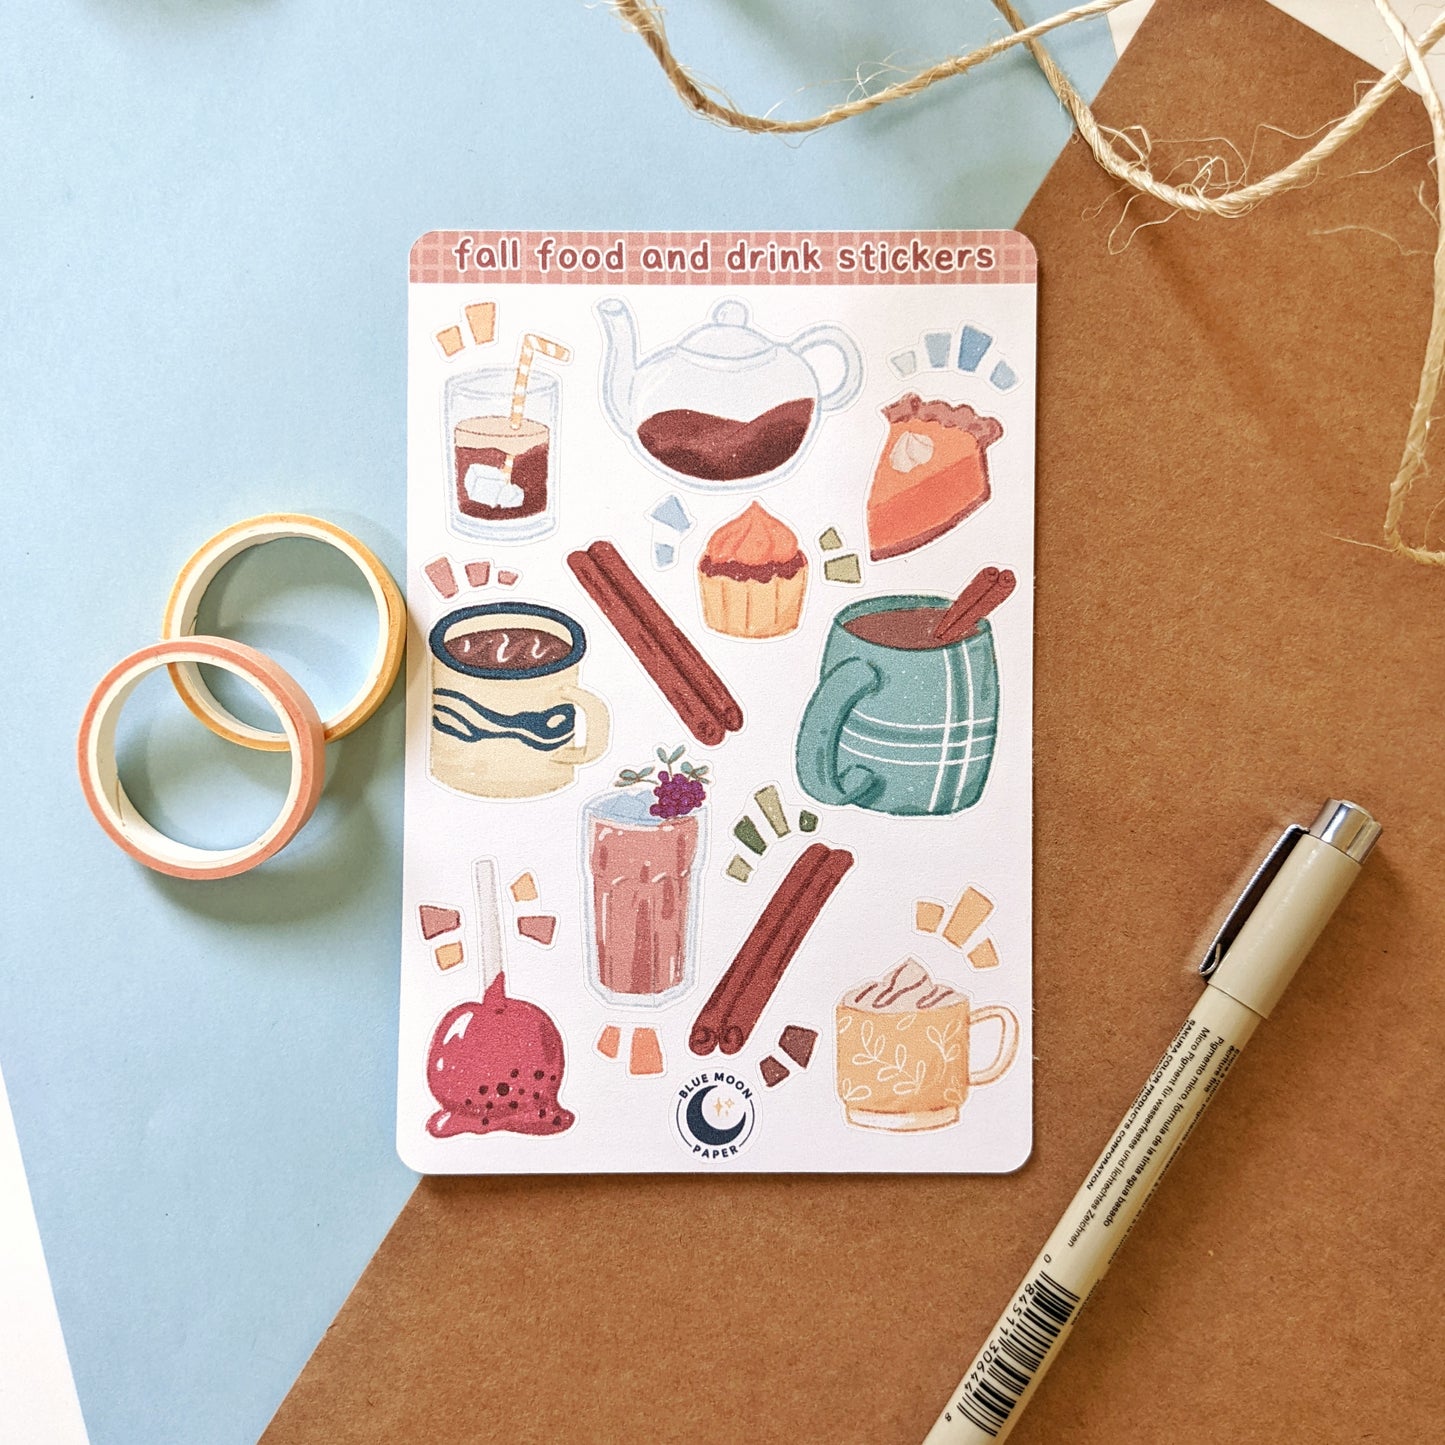 Sticker sheet featuring illustrations of fall themed food and drinks such as tea, candy apples, and hot chocolate.